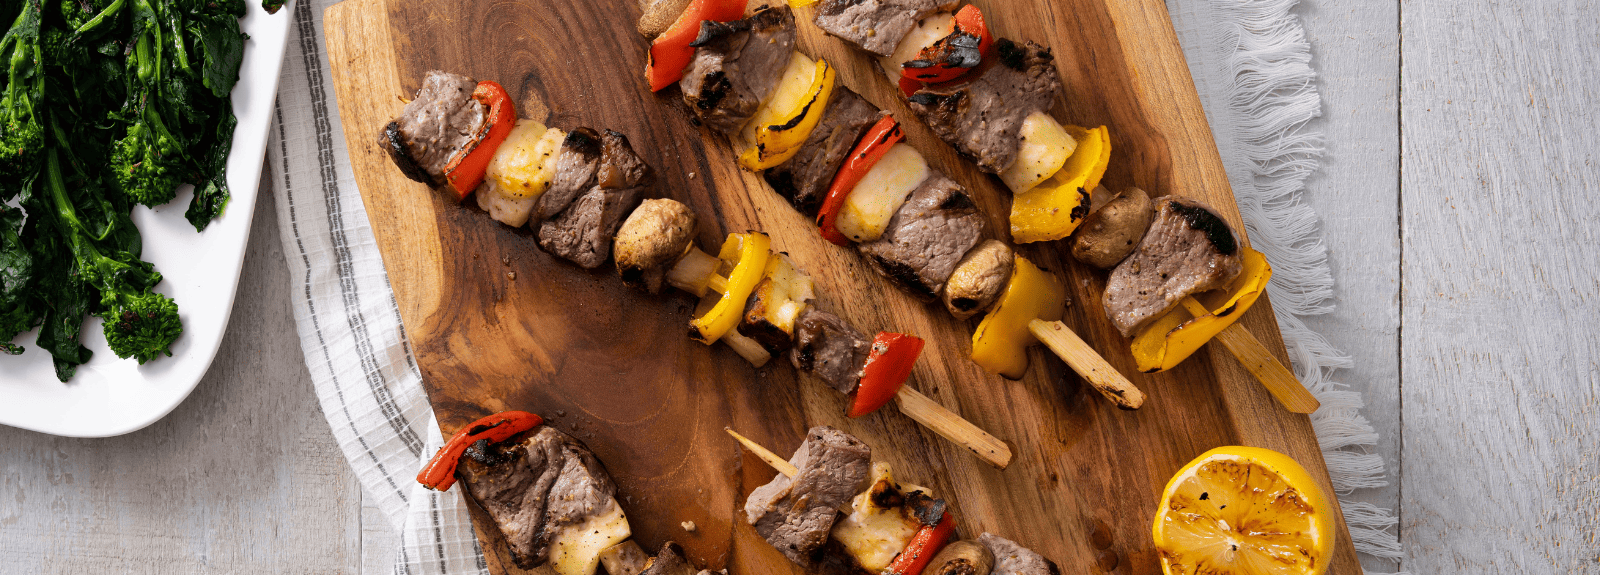 Grilled Beef and Halloumi Skewer